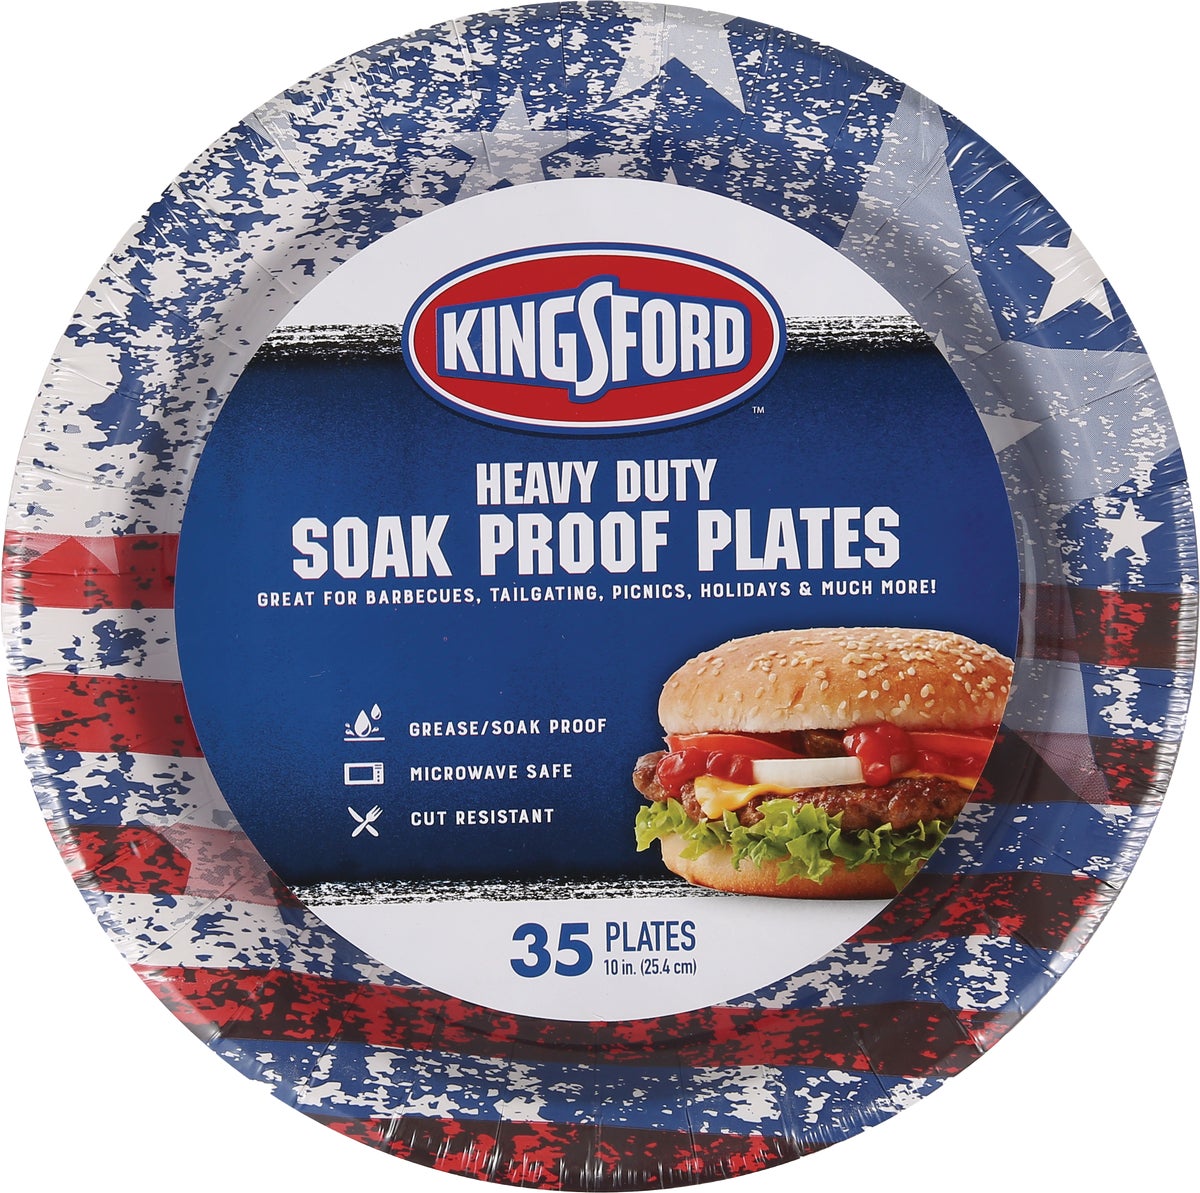 Hefty Everyday Plates Soak Proof Compartment 8.875 In Foam Plates, Plates